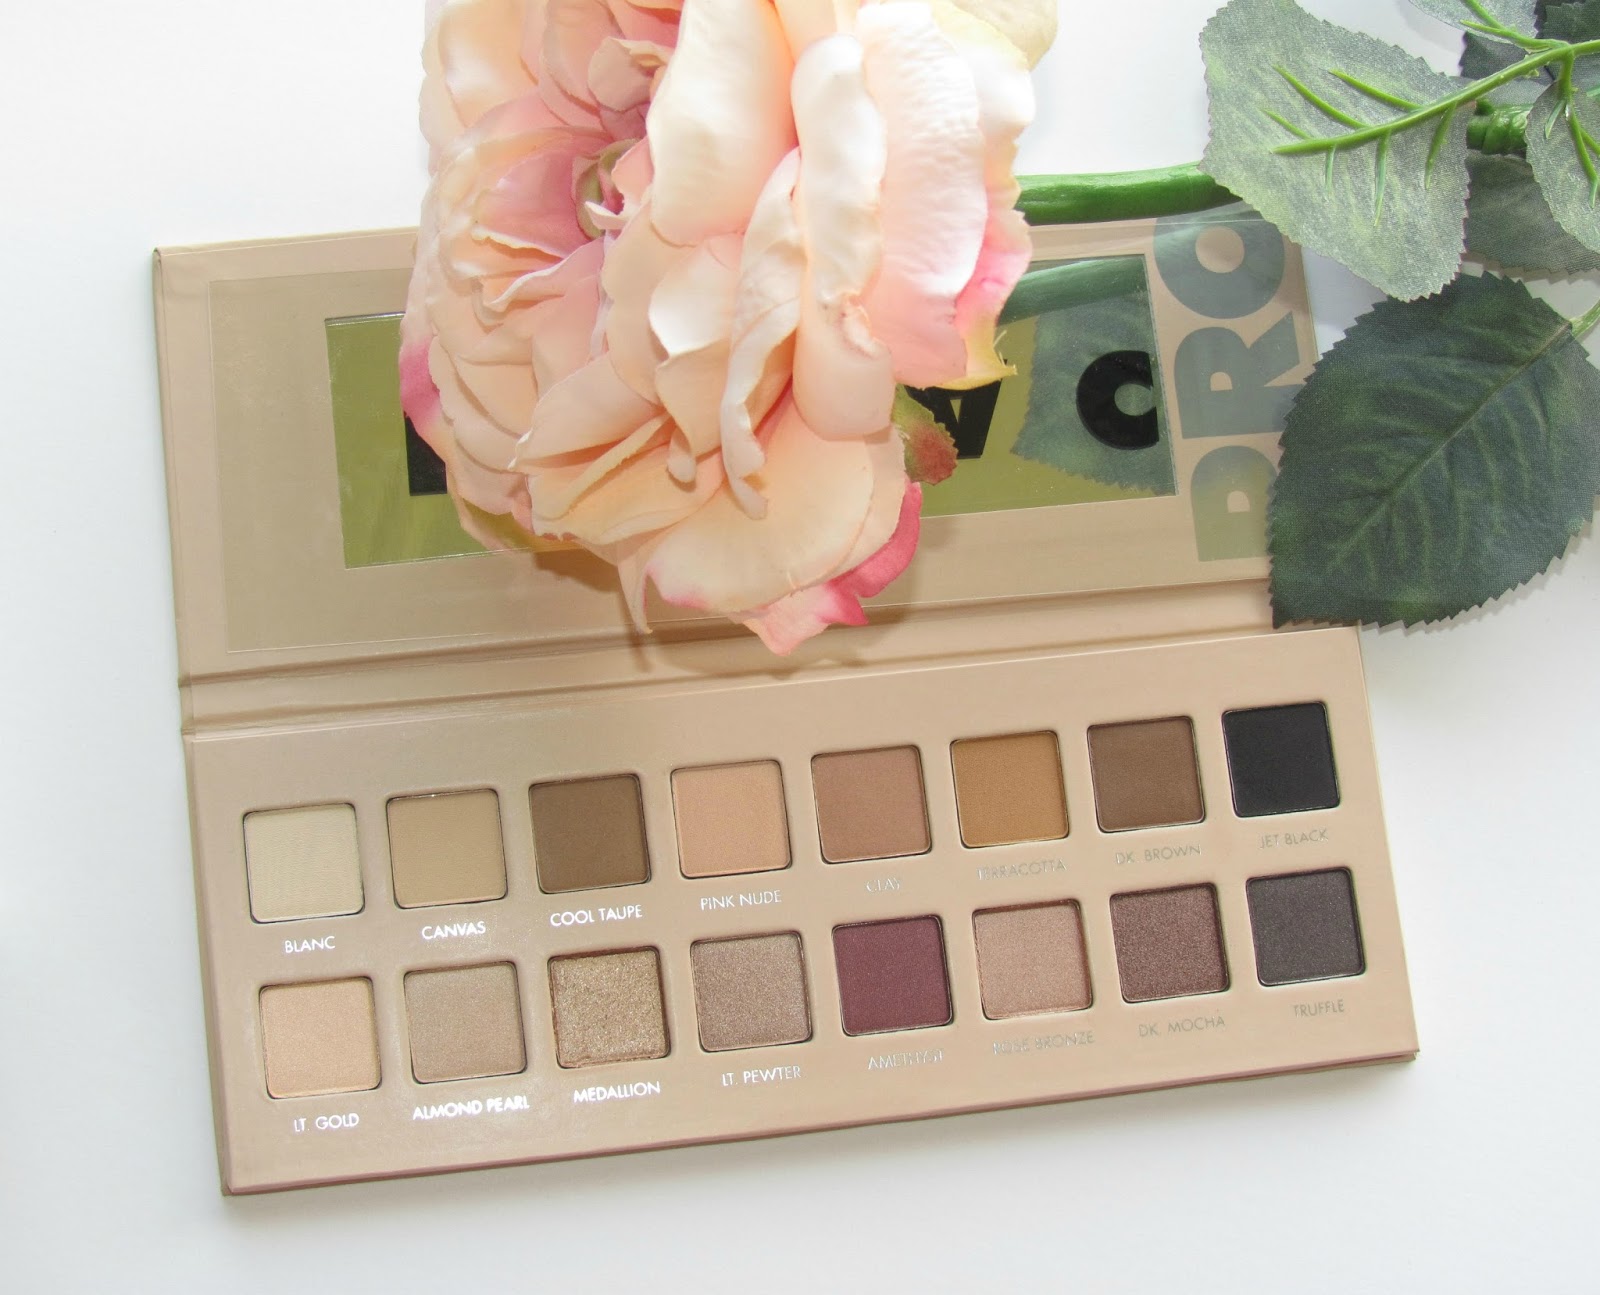 First look and swatches of the NEW Lorac Pro 3 Palette | beautywithlily.com